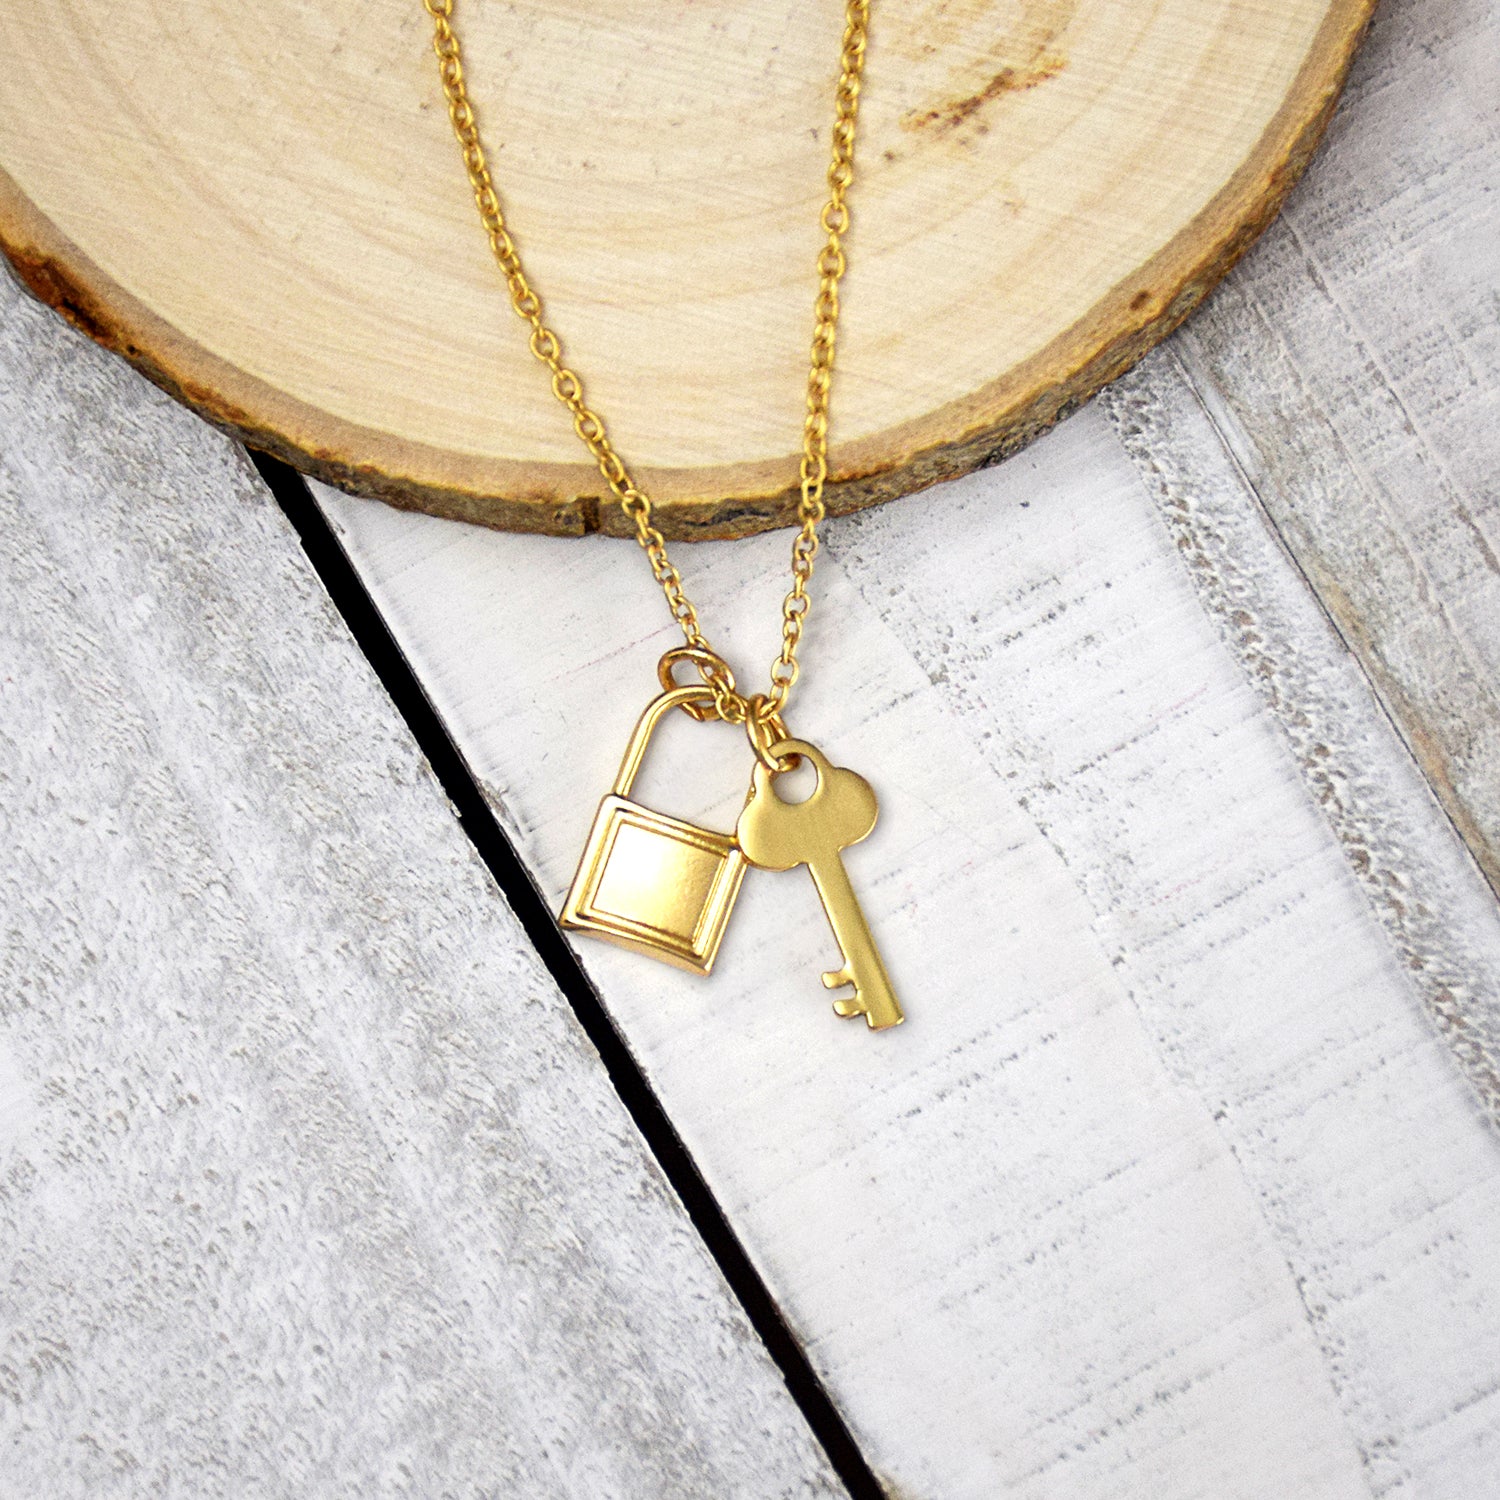 Golden Lock Key Charm Necklace, 18K Gold Plated, .925 Sterling Silver Everyday Dainty Necklace